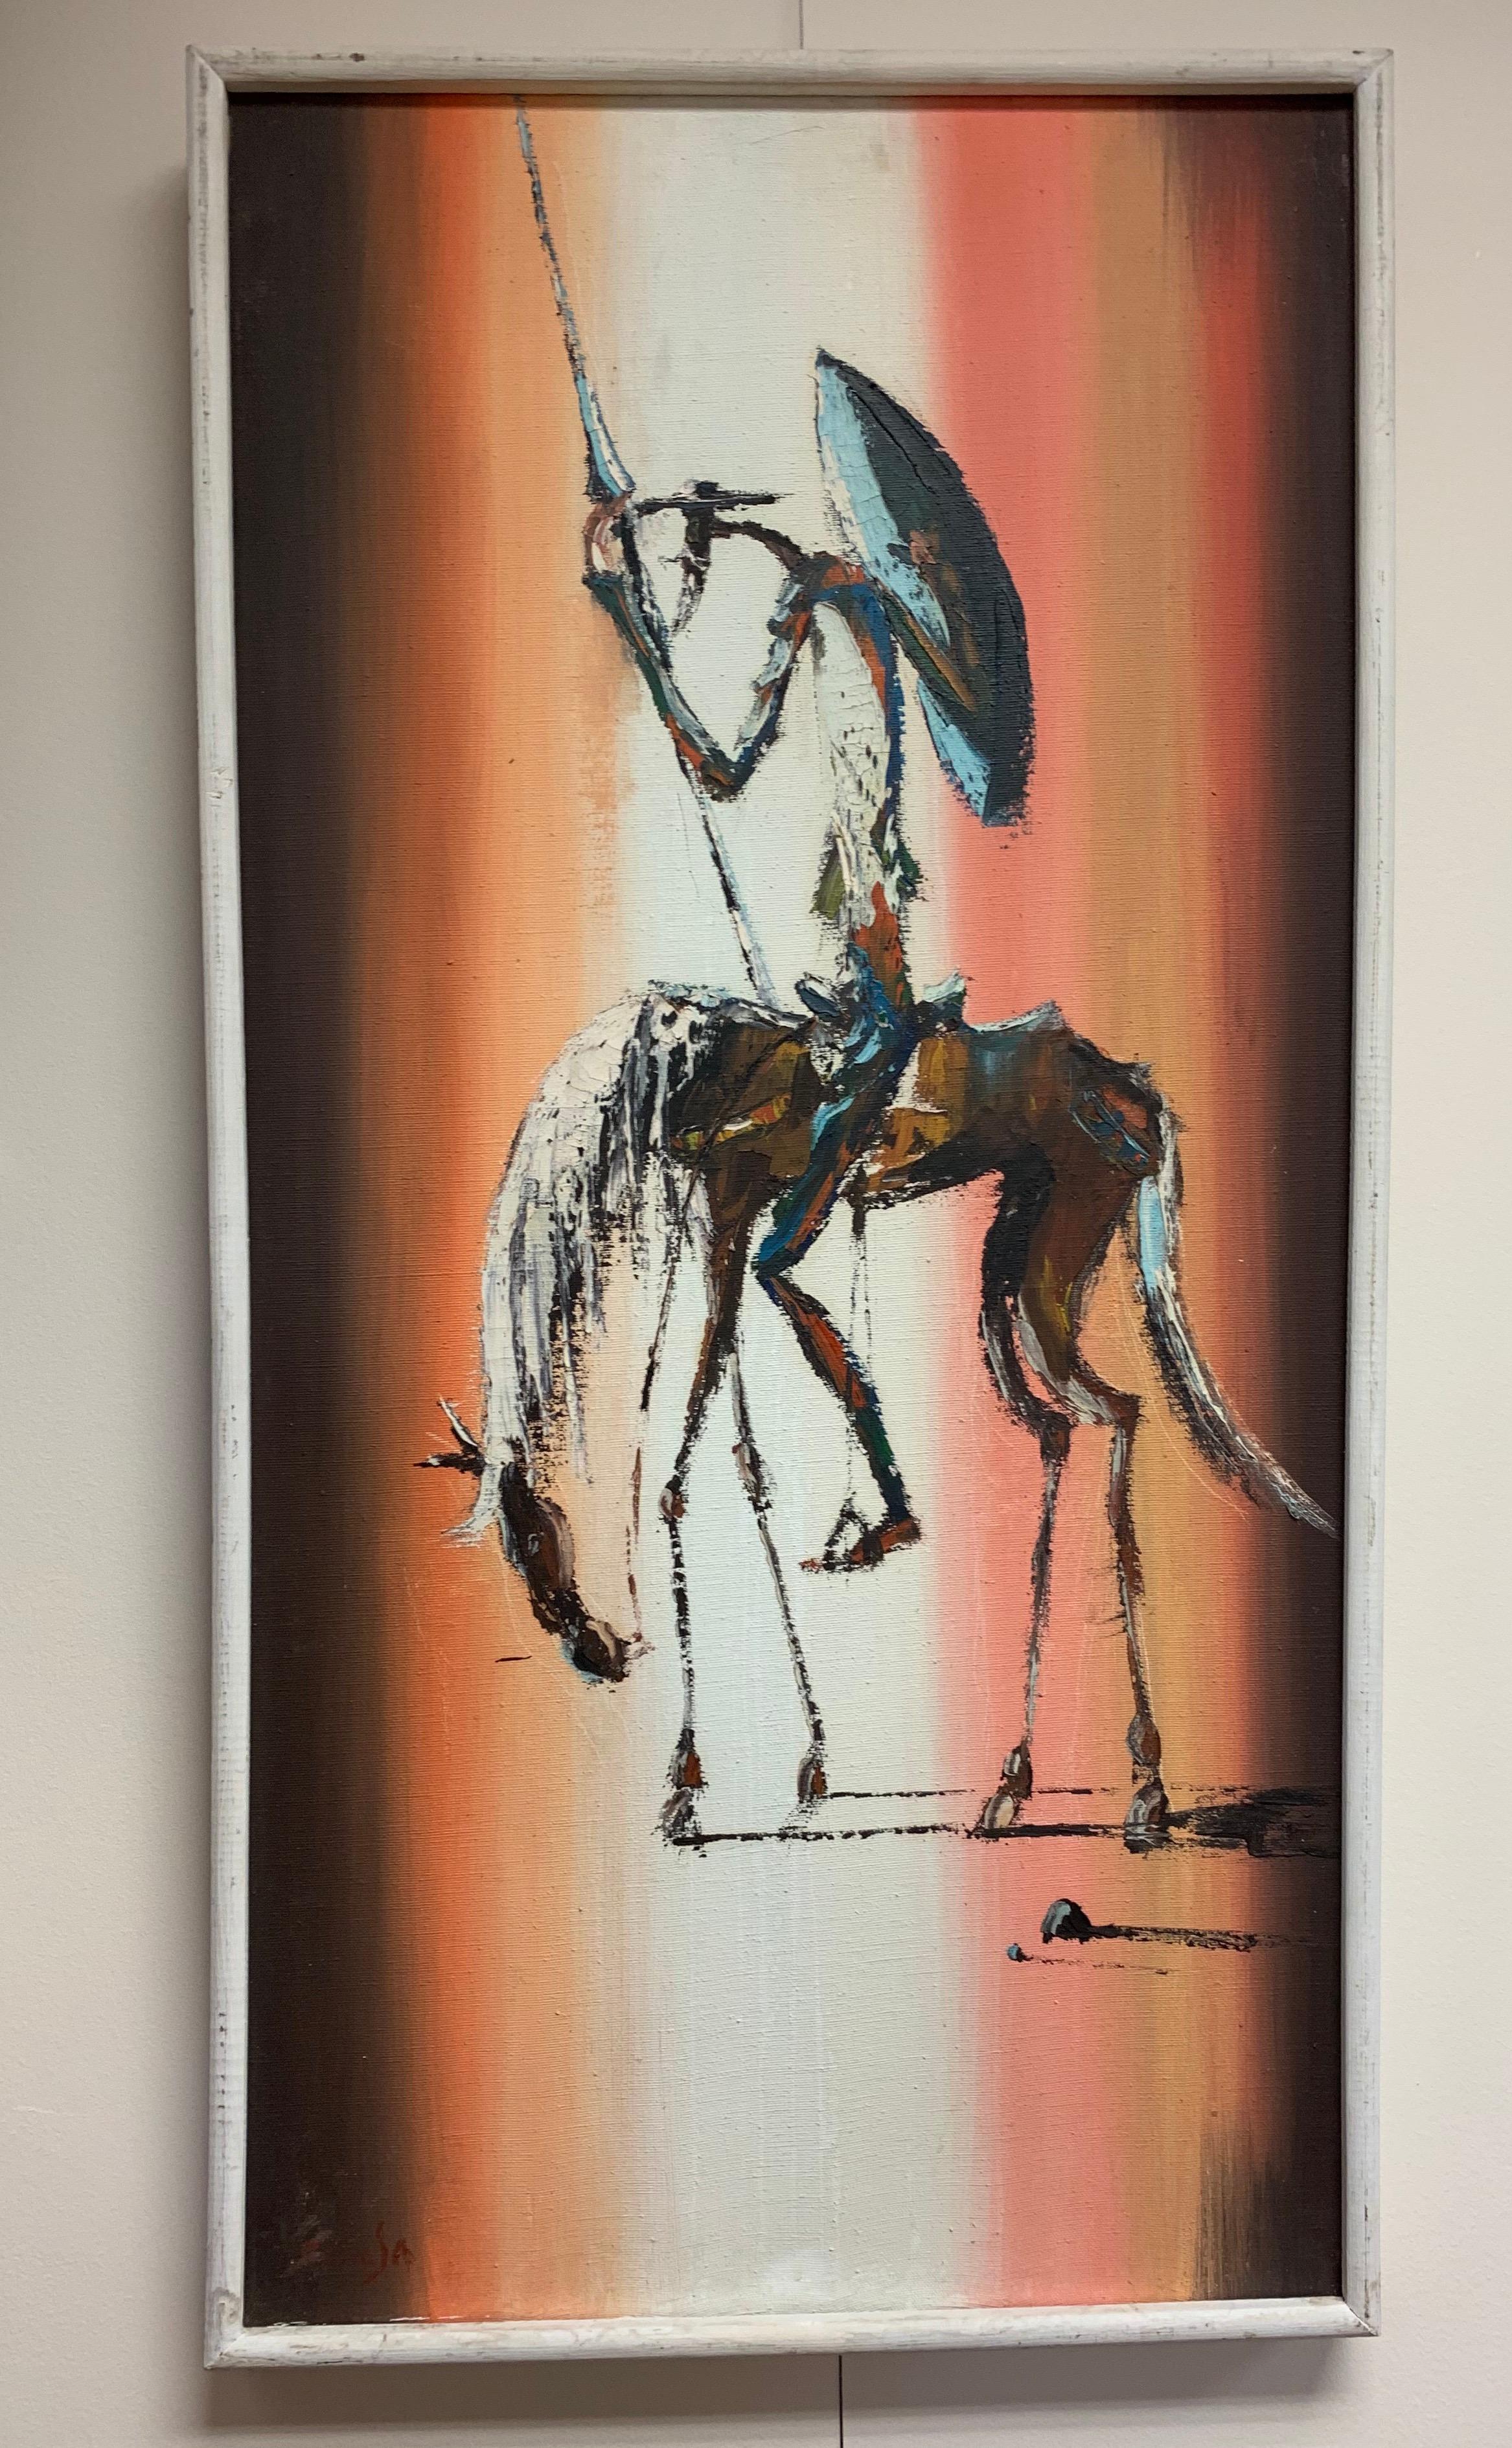 Rare and coveted original oil on canvas painting by Colombia's Guillermo Espinosa. The theme of the original art work is a man on a horse. This would have been painted in the 1950s-1960s. Espinosa died in 2010 and his pieces are well known in Latin